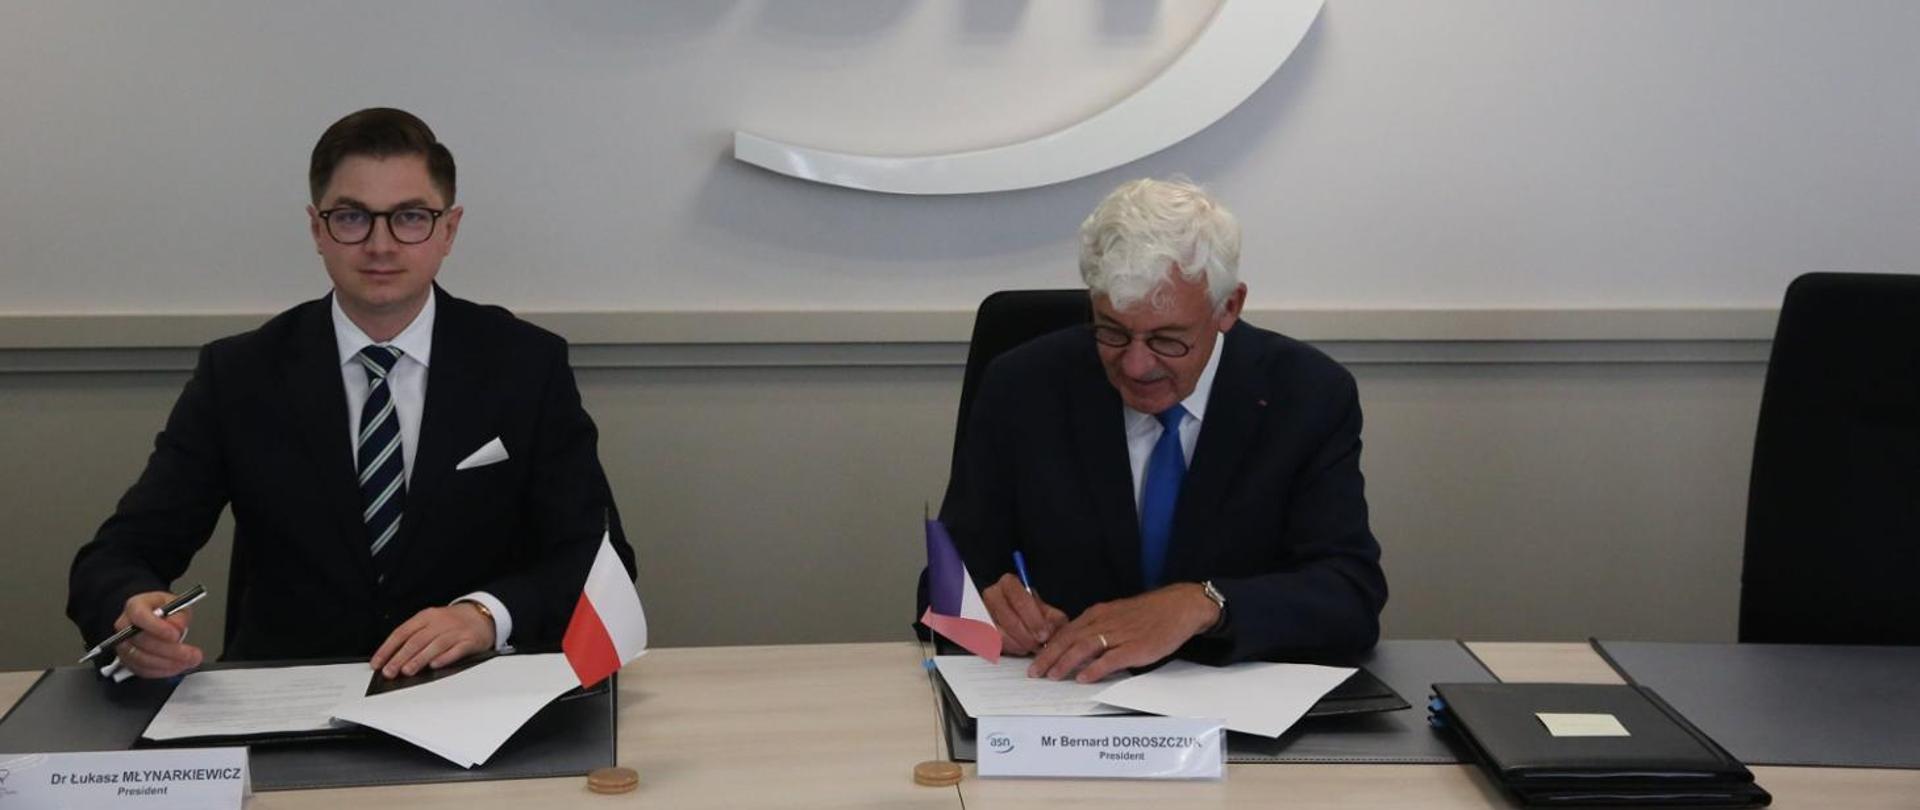 The PAA President and the ASN Chairman sign an agreement on further cooperation between the Polish and French nuclear regulatory authorities